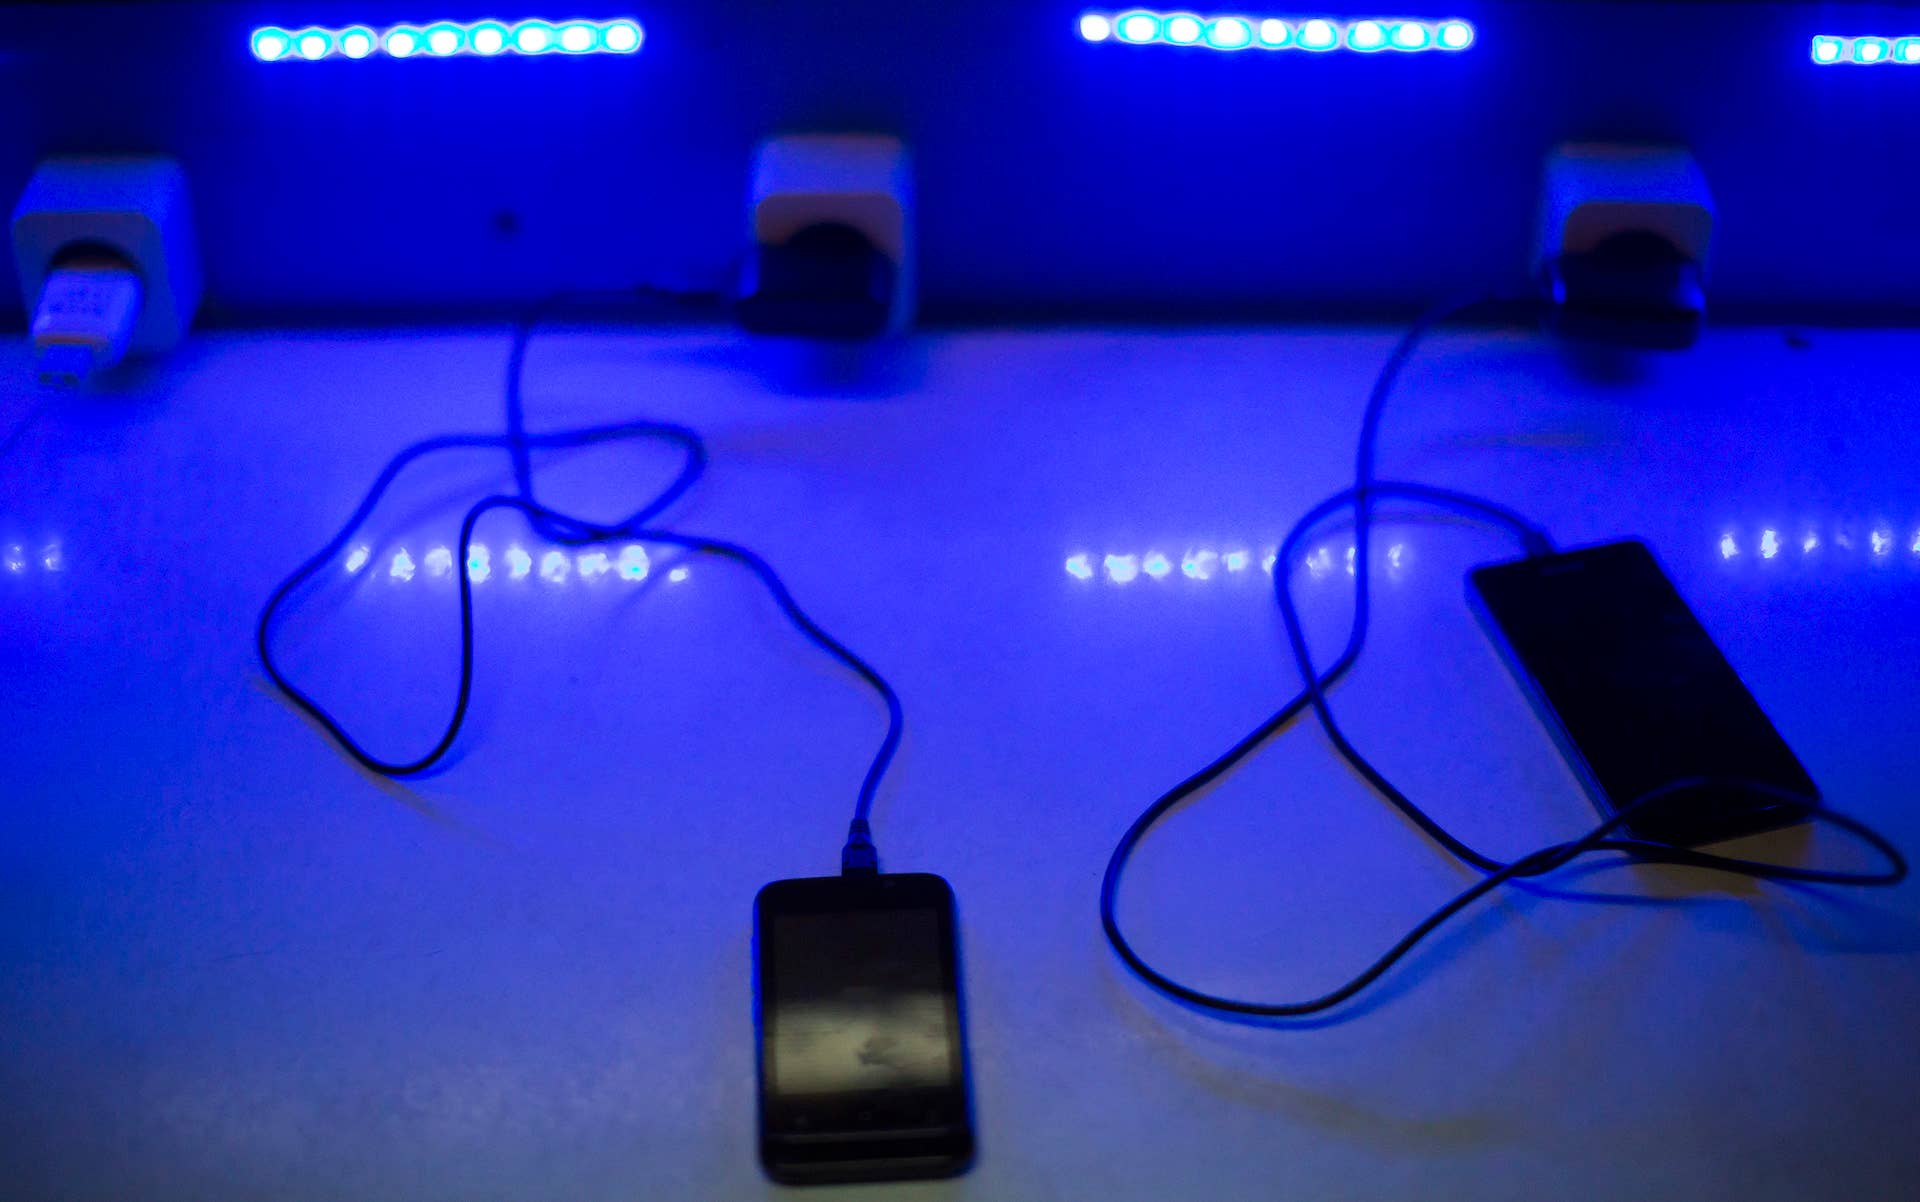 Don't plug your phone into a free charging station, warns FBI